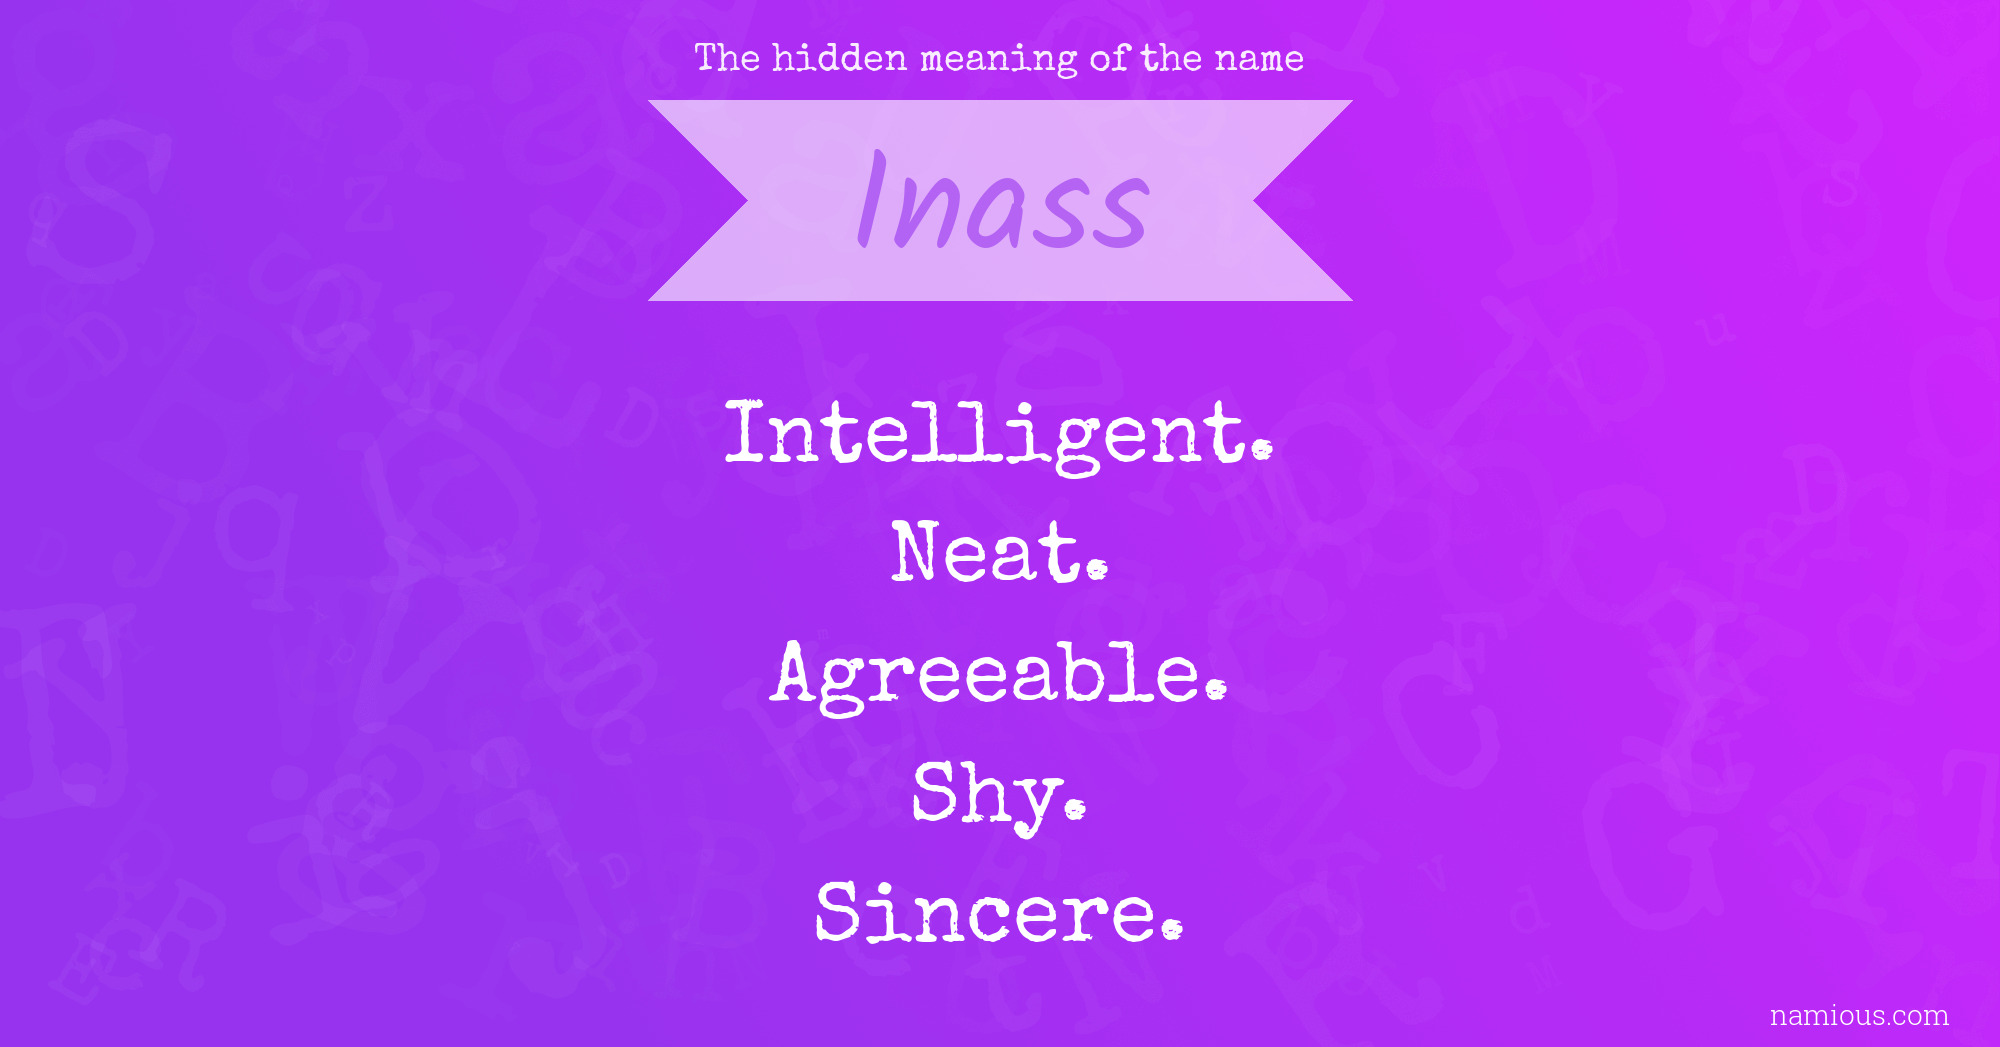 The hidden meaning of the name Inass